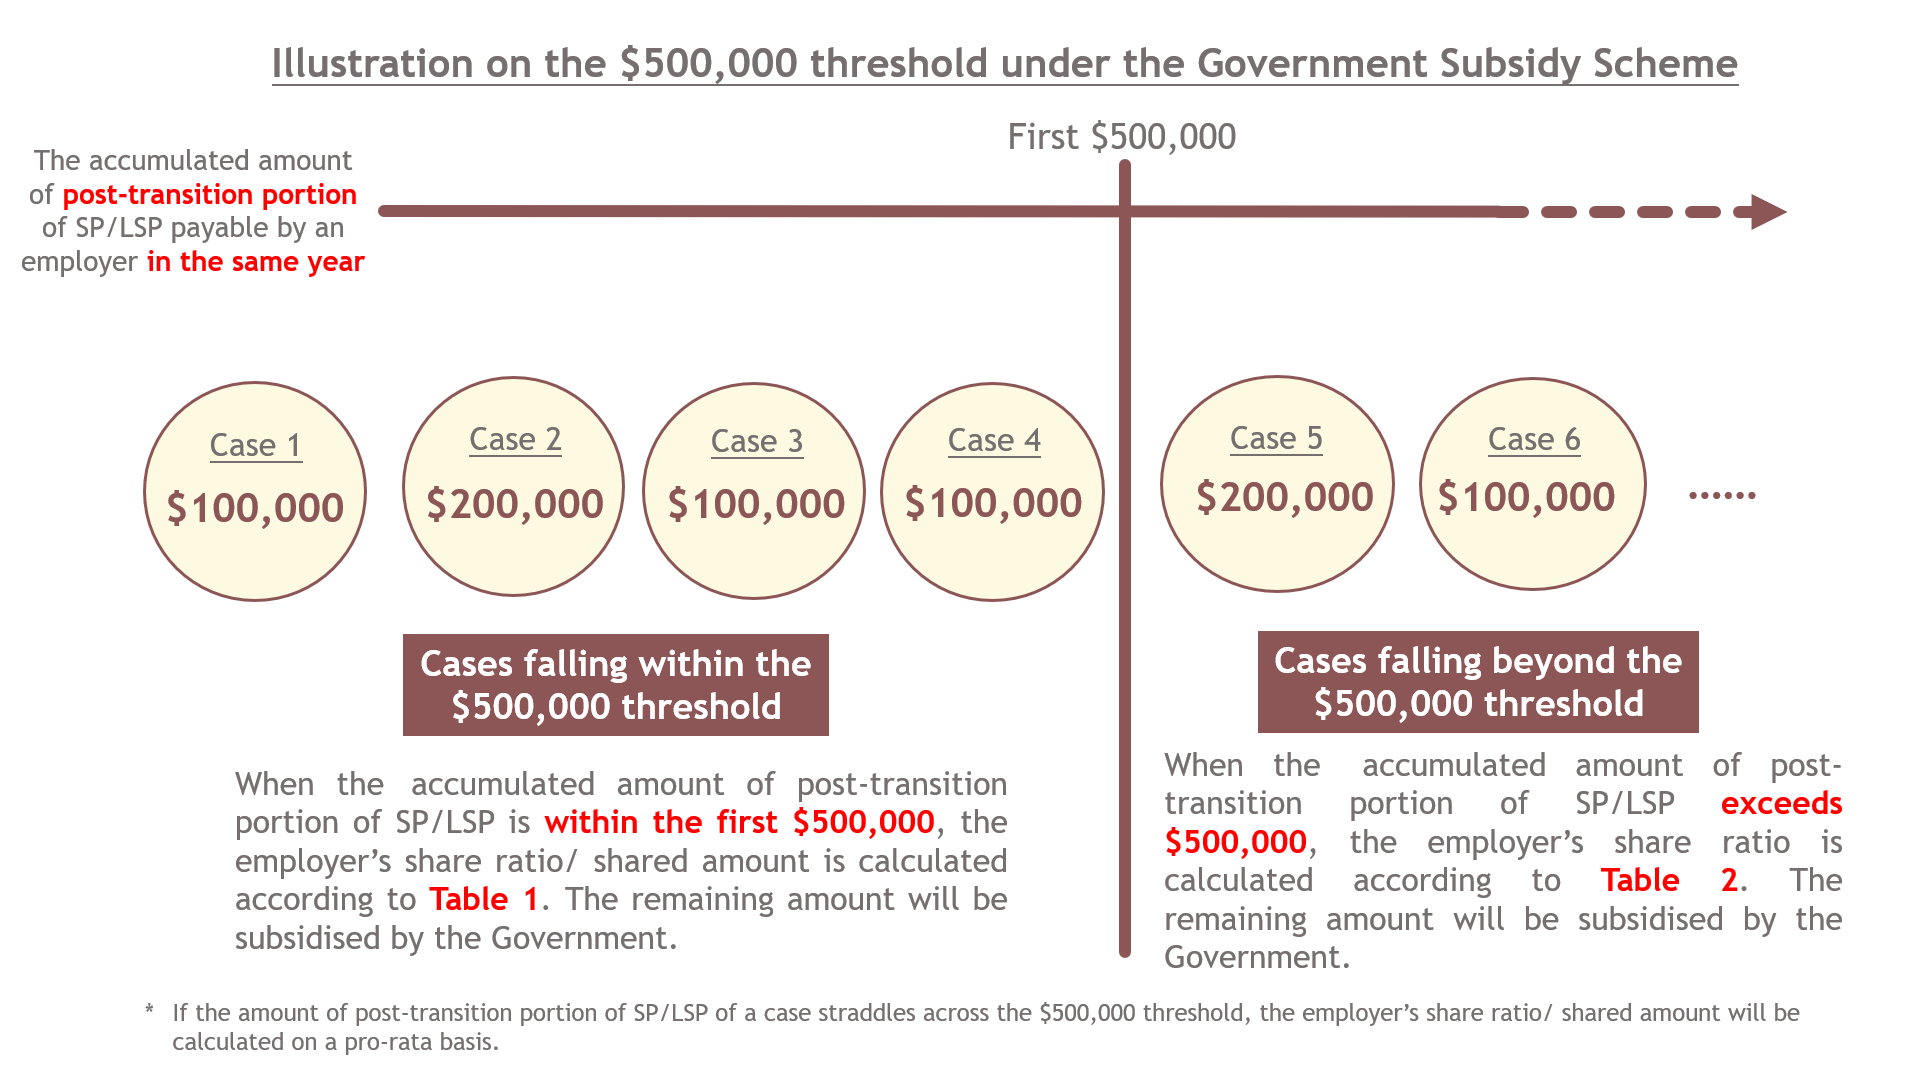 lllustration on the $500,000 threshold under the Government Subsidy Scheme